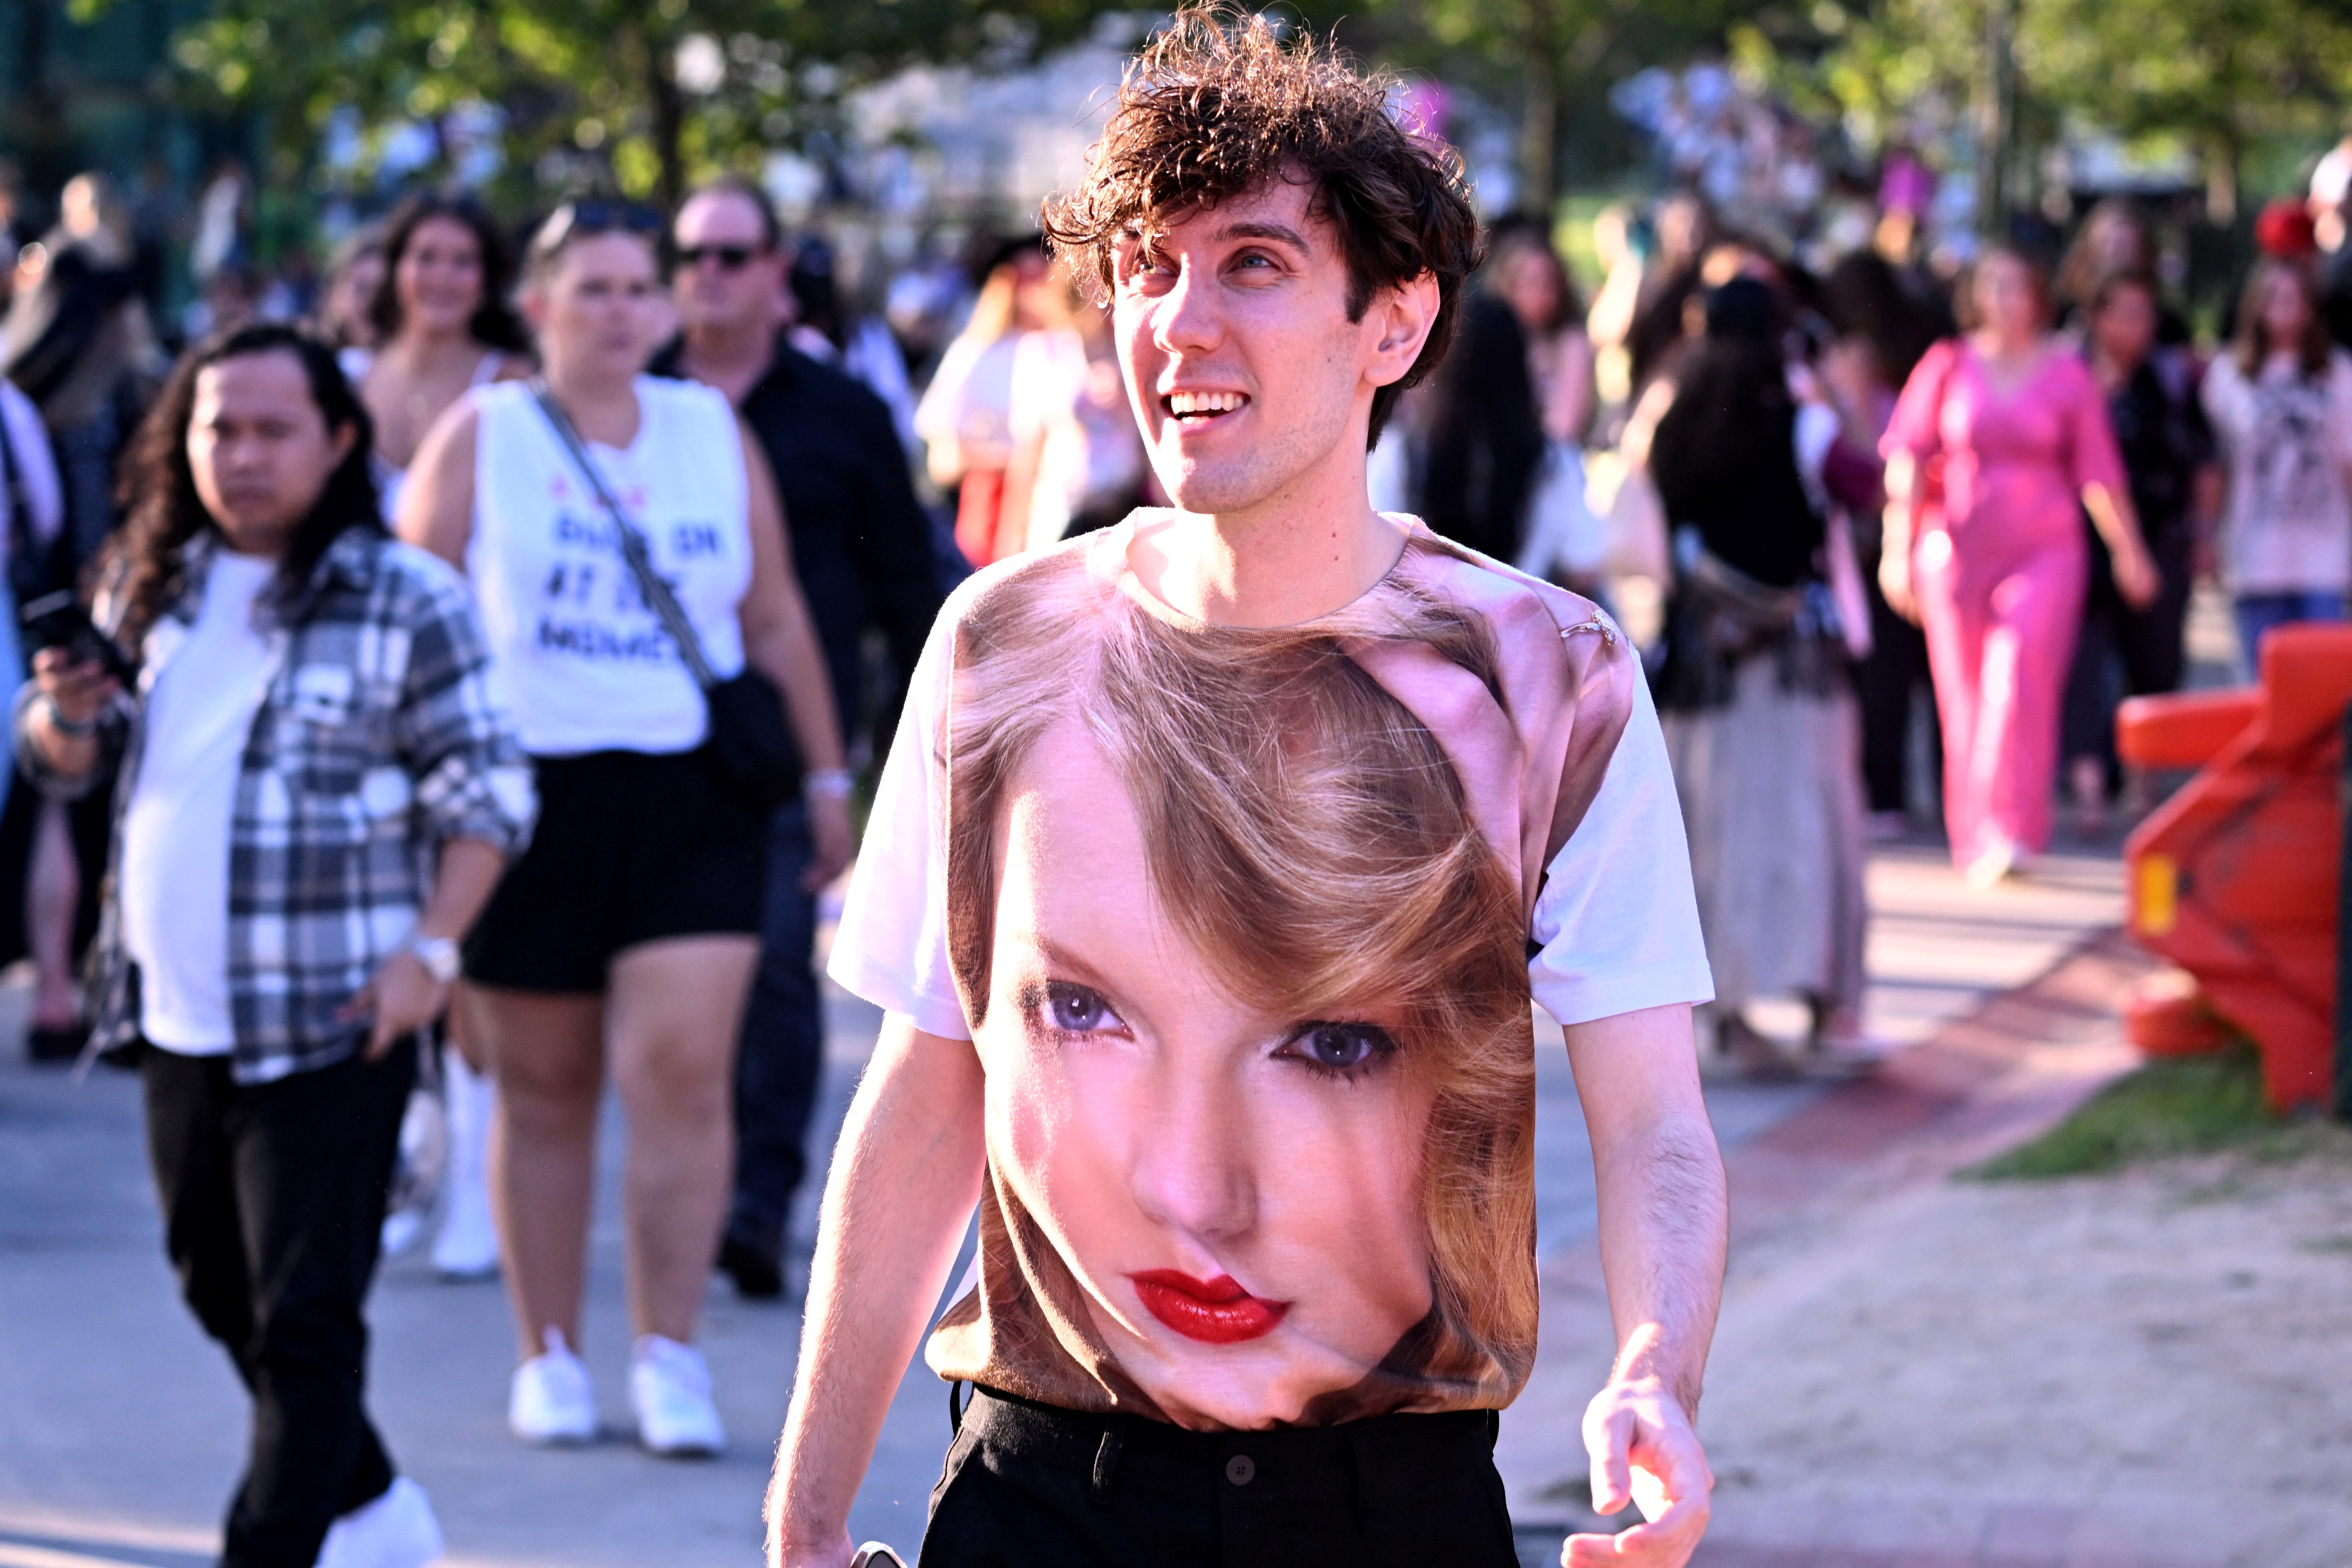 Fans of Taylor Swift, also known as a Swifties, arrive at the Melbourne Cricket Ground (MCG) last week